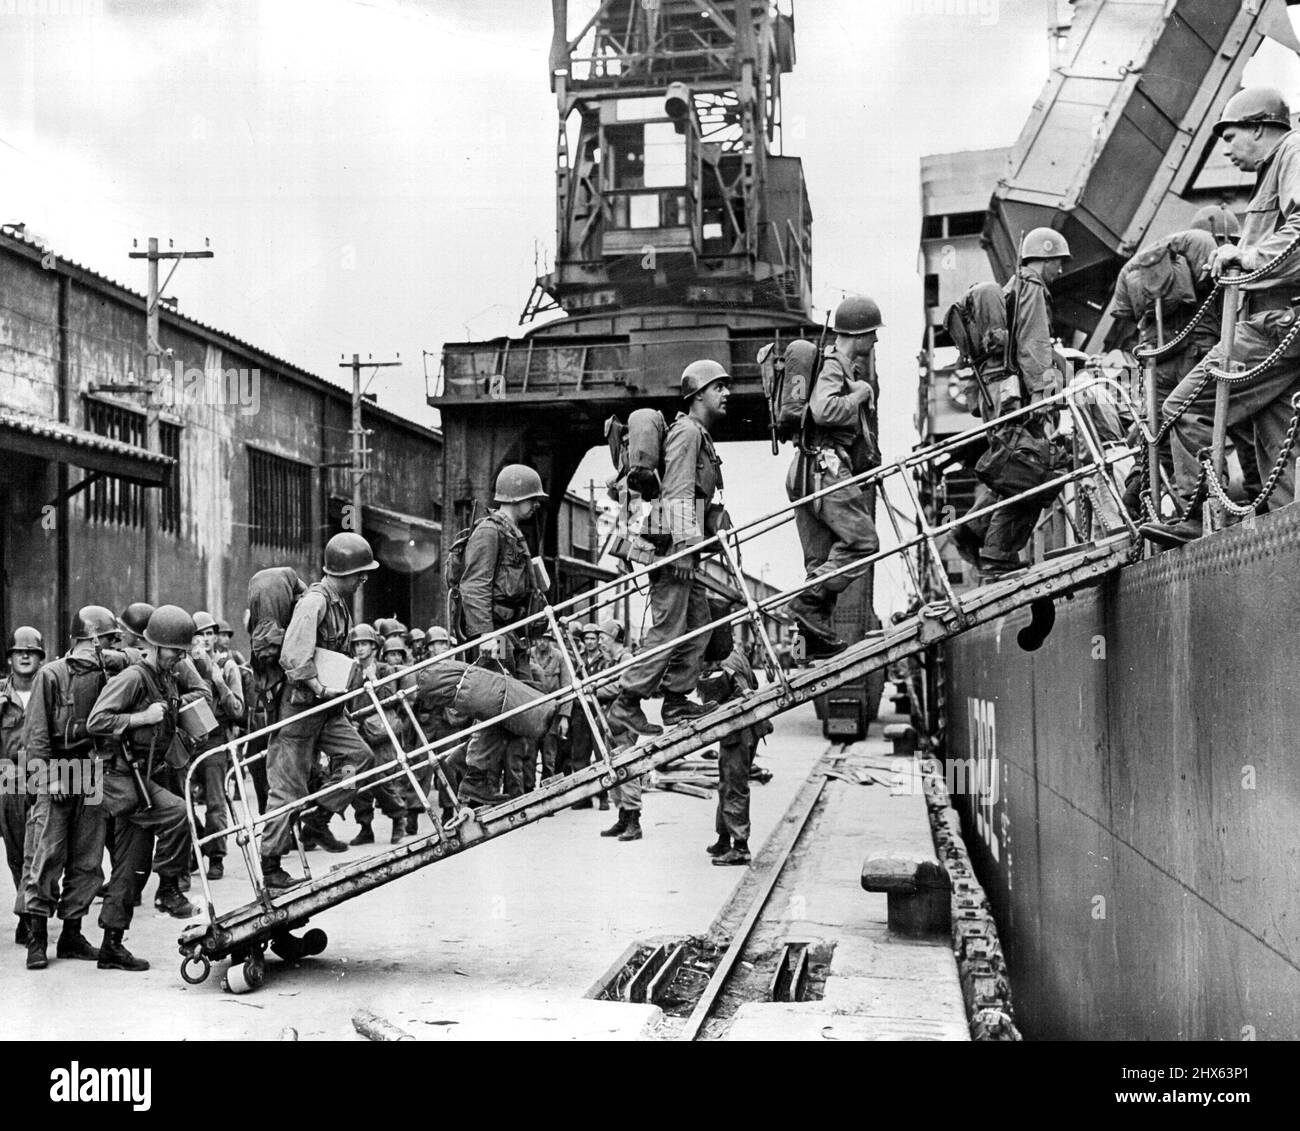 United States Army troops are shown boarding a ship ***** Japanese port, en route to the Republic of Korea to assist United Nations forces in the defense of the Republic against North Korean Communist invaders. January 1, 1950. Stock Photo